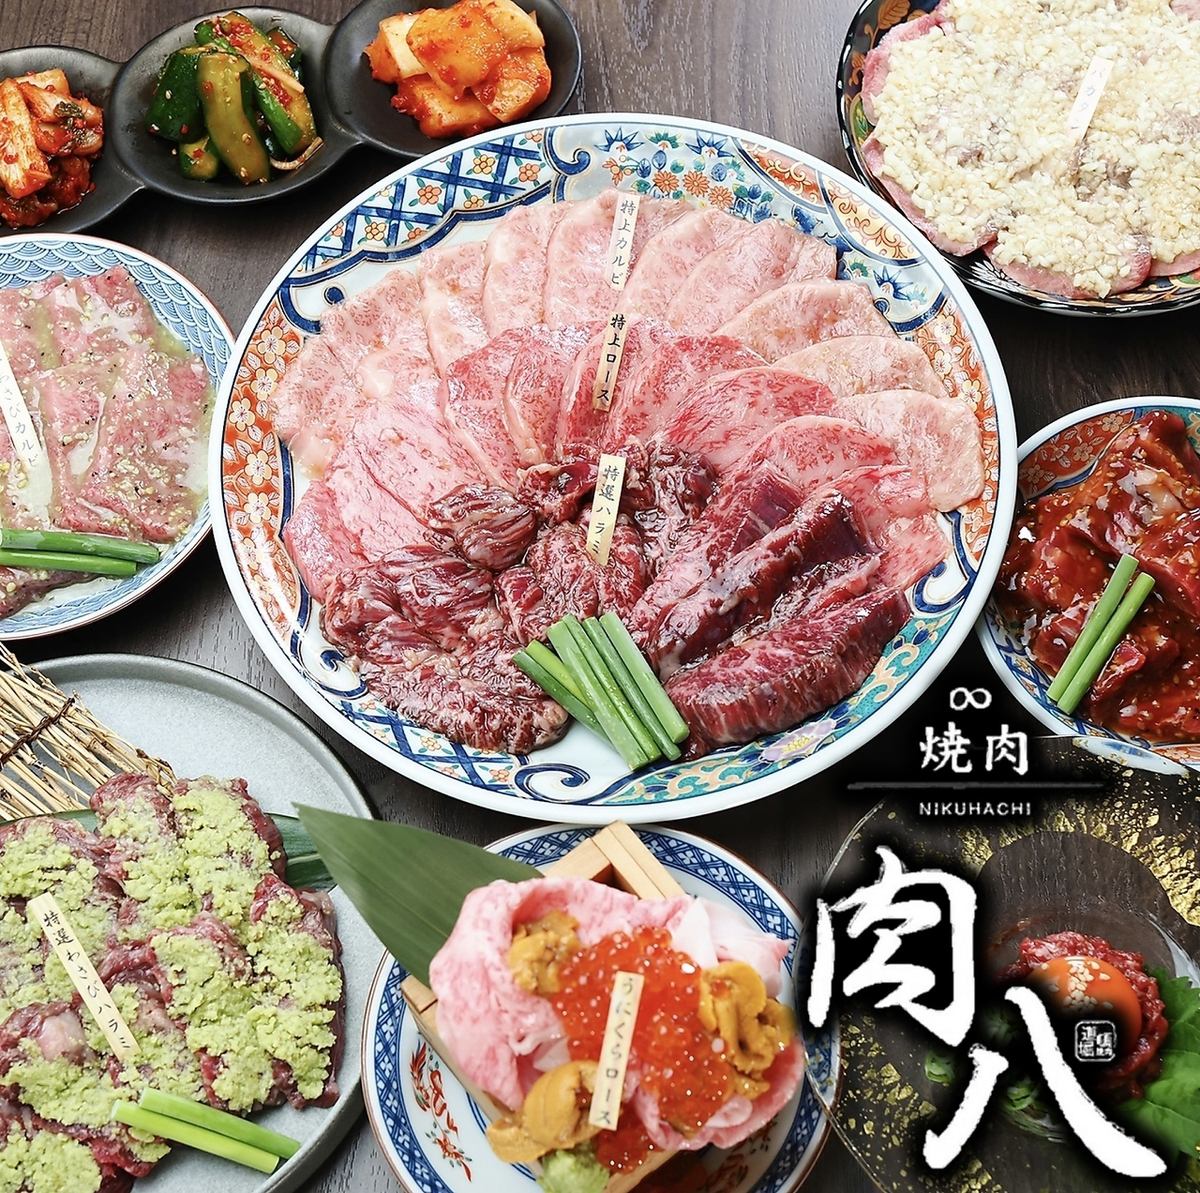 A famous restaurant in Namba opens in Tenma!! Delicious meat is available. Please come and visit us!